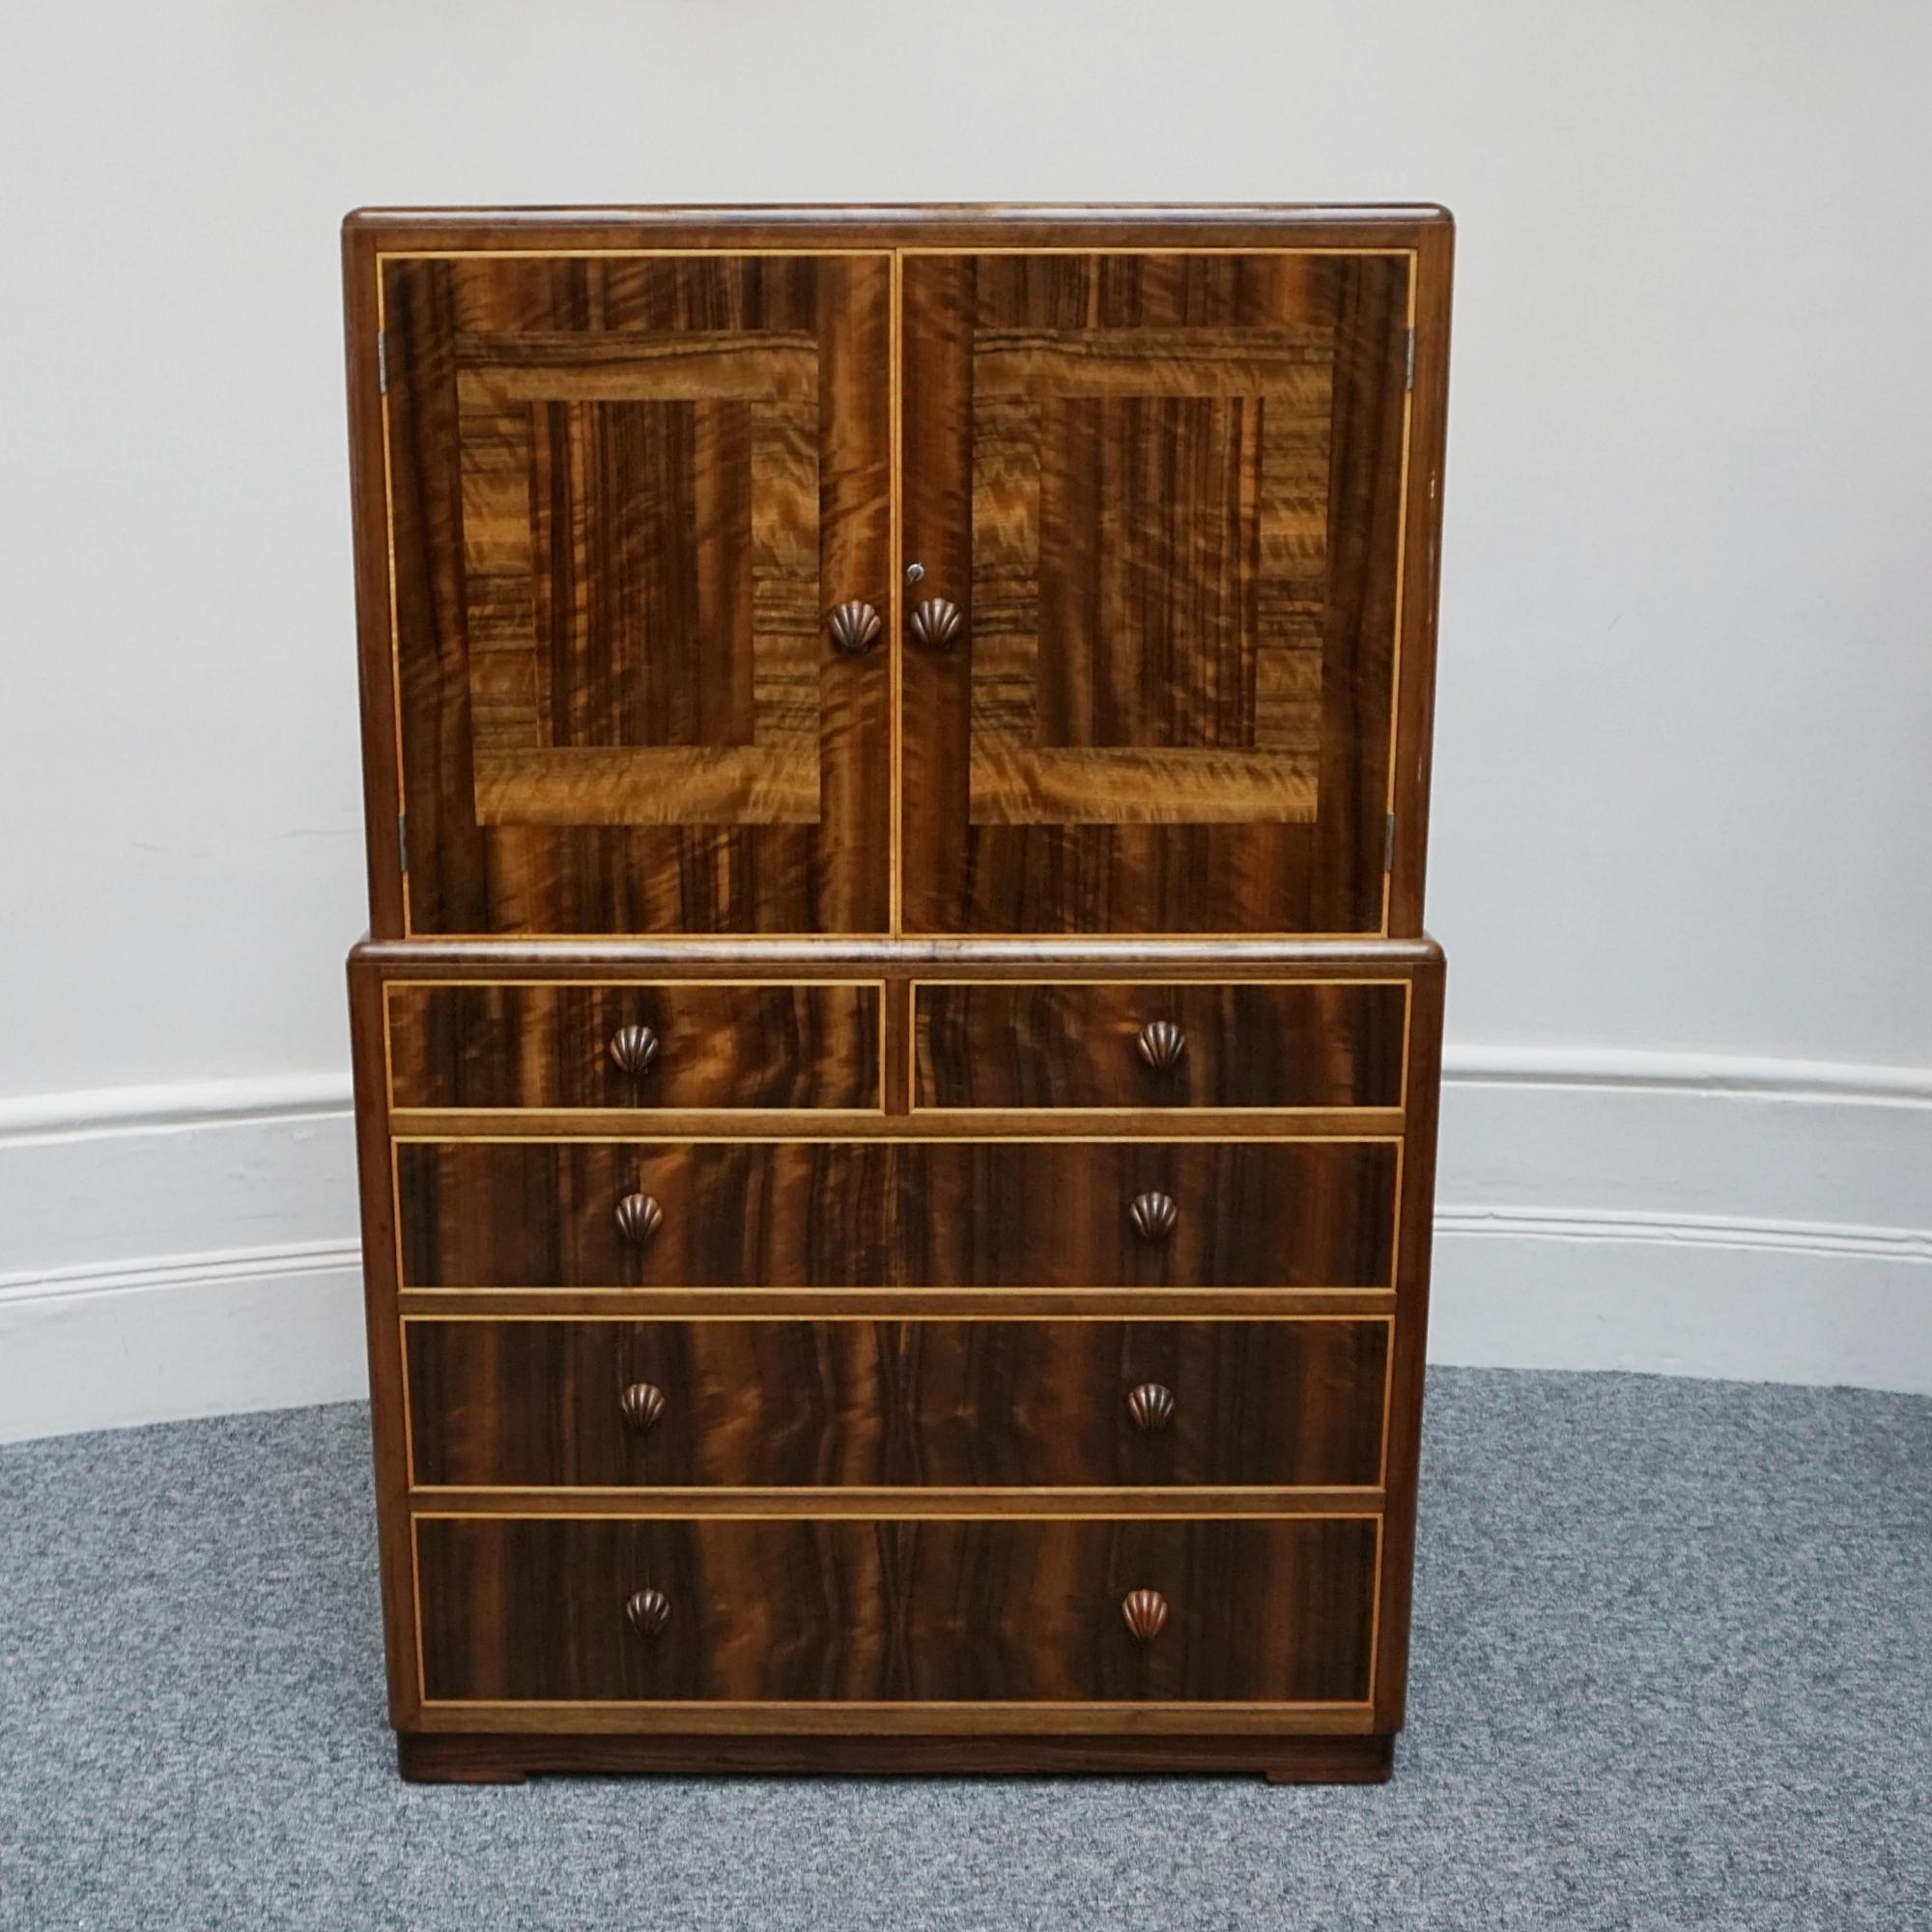 Art Deco Linen Cabinet by Betty Joel. Upper shelved cabinet above with an assortment of drawers below. Walnut and macassar ebony with original carved shell handles. Stamped signed and dated with designer and makers signature. 

Dimensions: H 148cm W